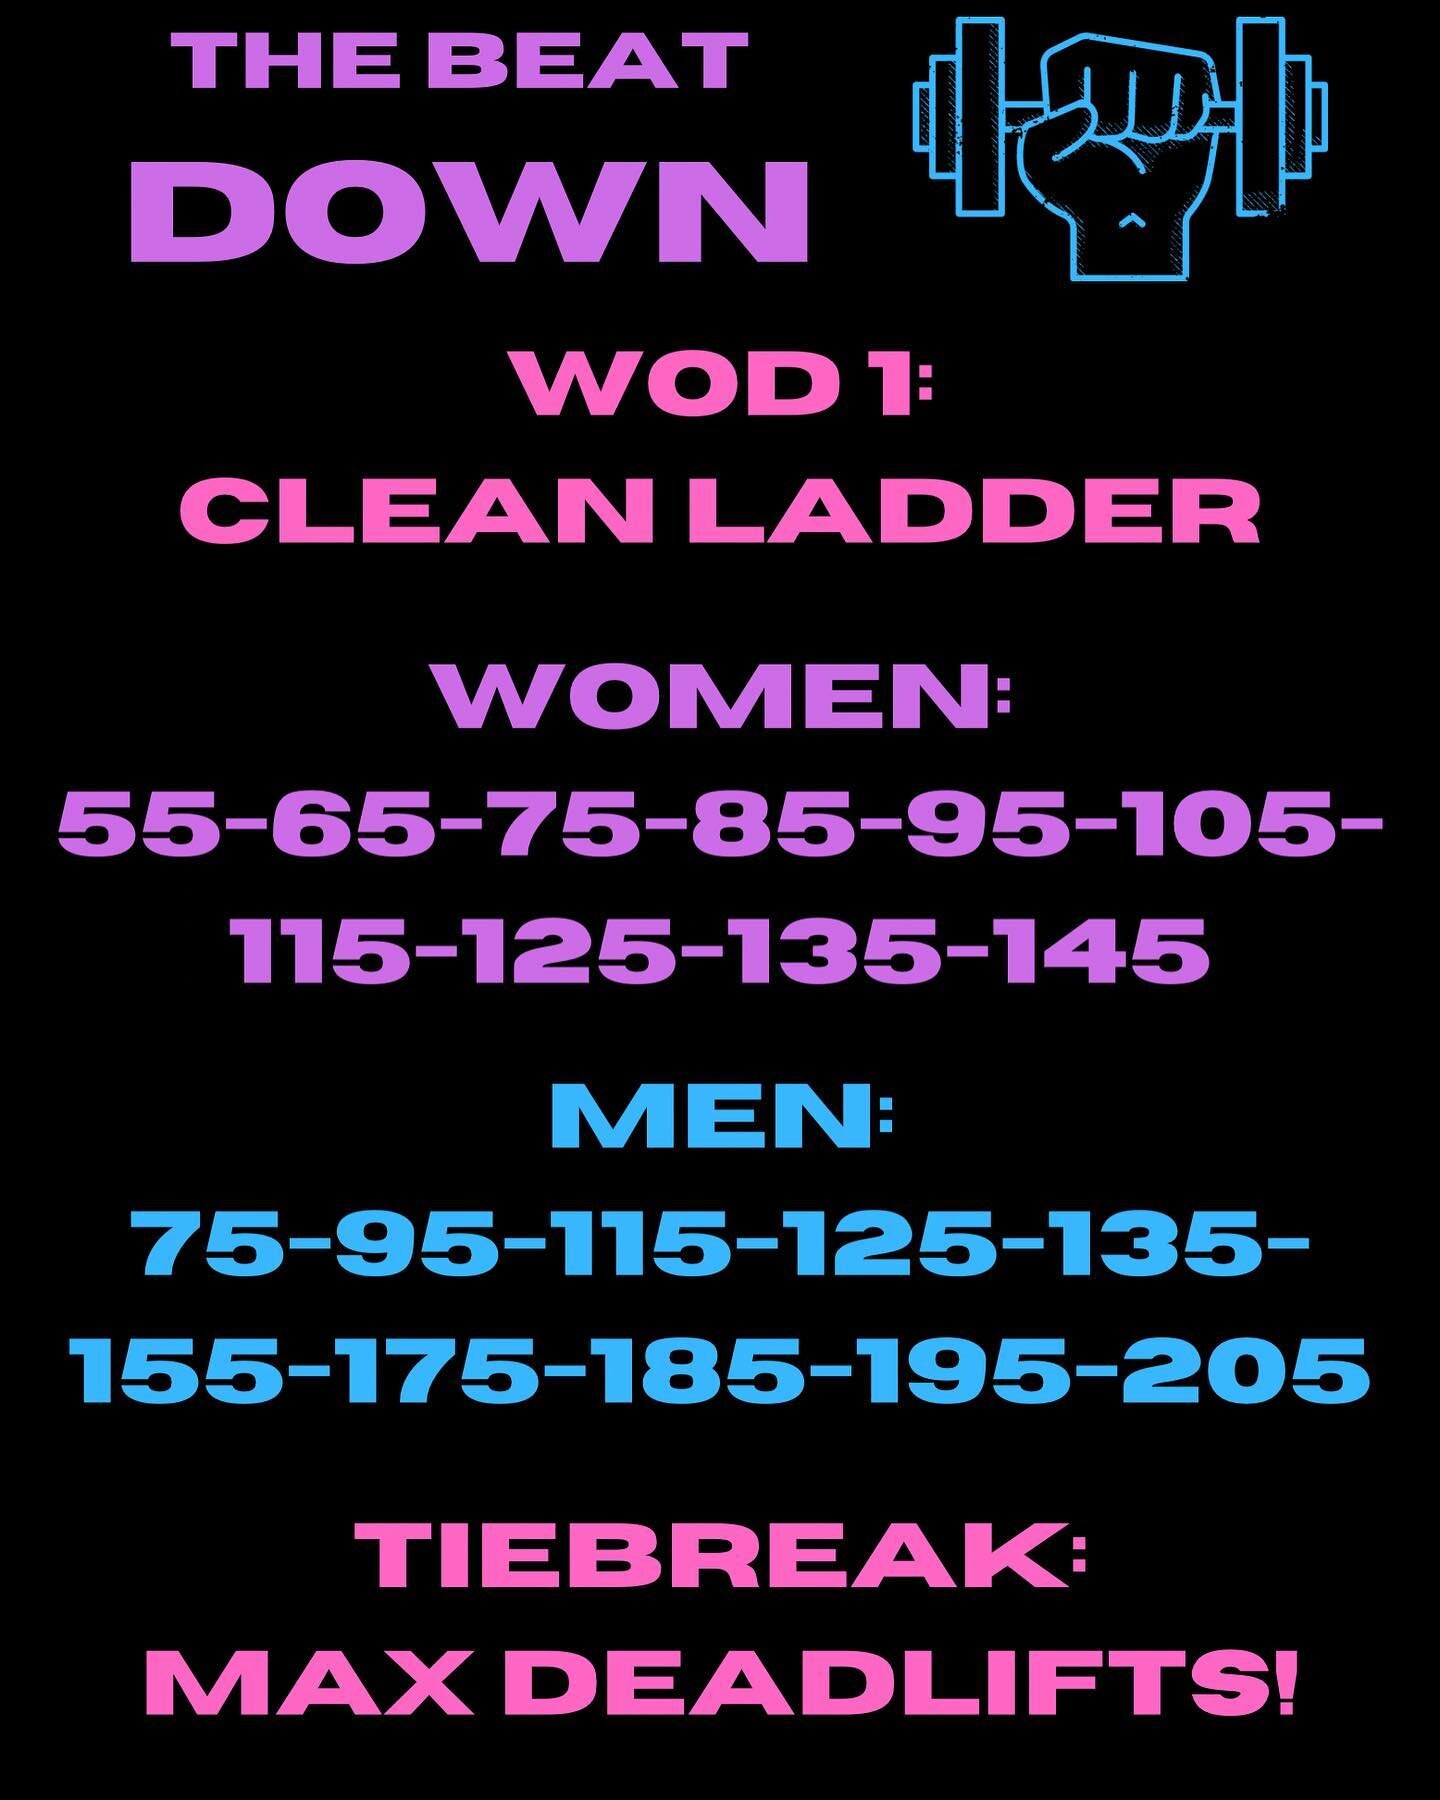 ‼️ WOD 1 ‼️ 

CLEAN LADDER! 💪🏼

At 3,2,1 go you will have 1 minute to complete 1 clean (power or squat). You can try as many times as you would like to finish the rep, in the time allowed, but if you are unable to complete the clean you are out o